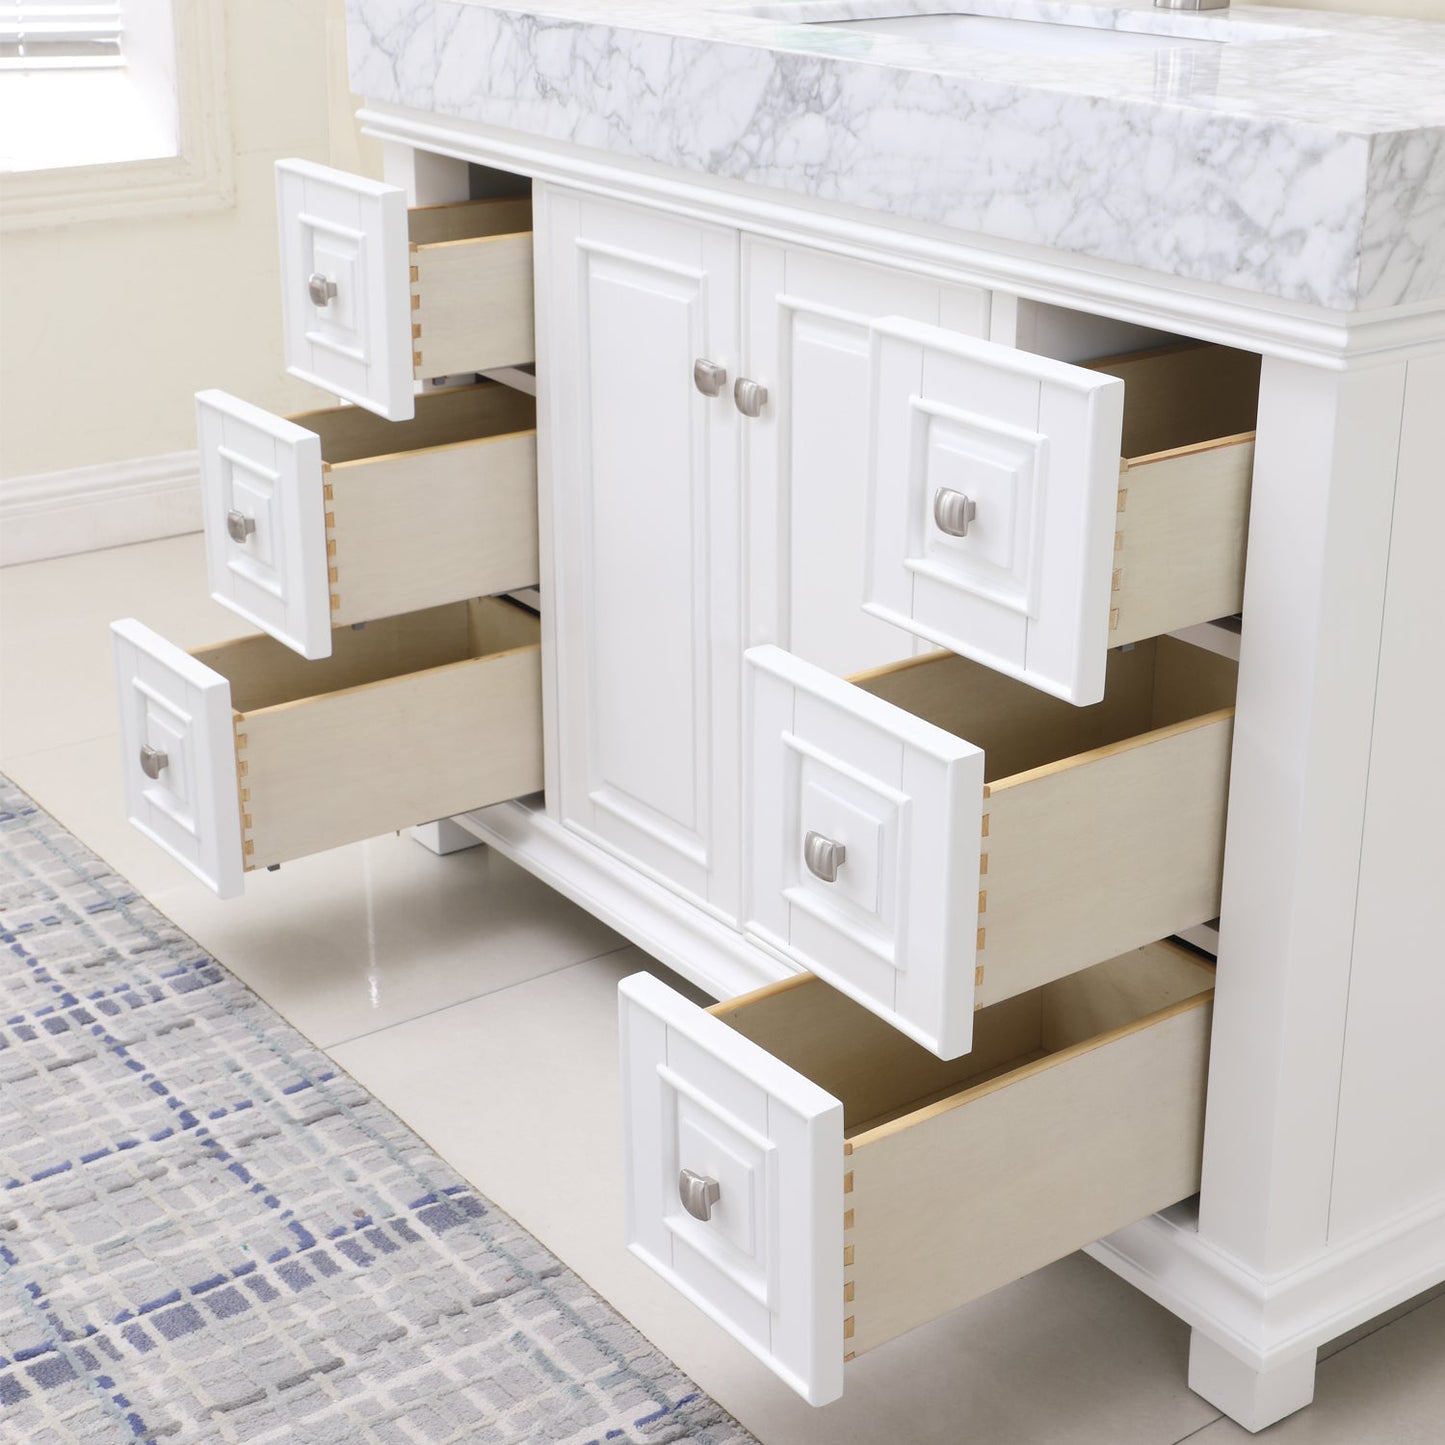 Jardin 48" Single Bathroom Vanity Set in White and Carrara White Marble Countertop with Mirror